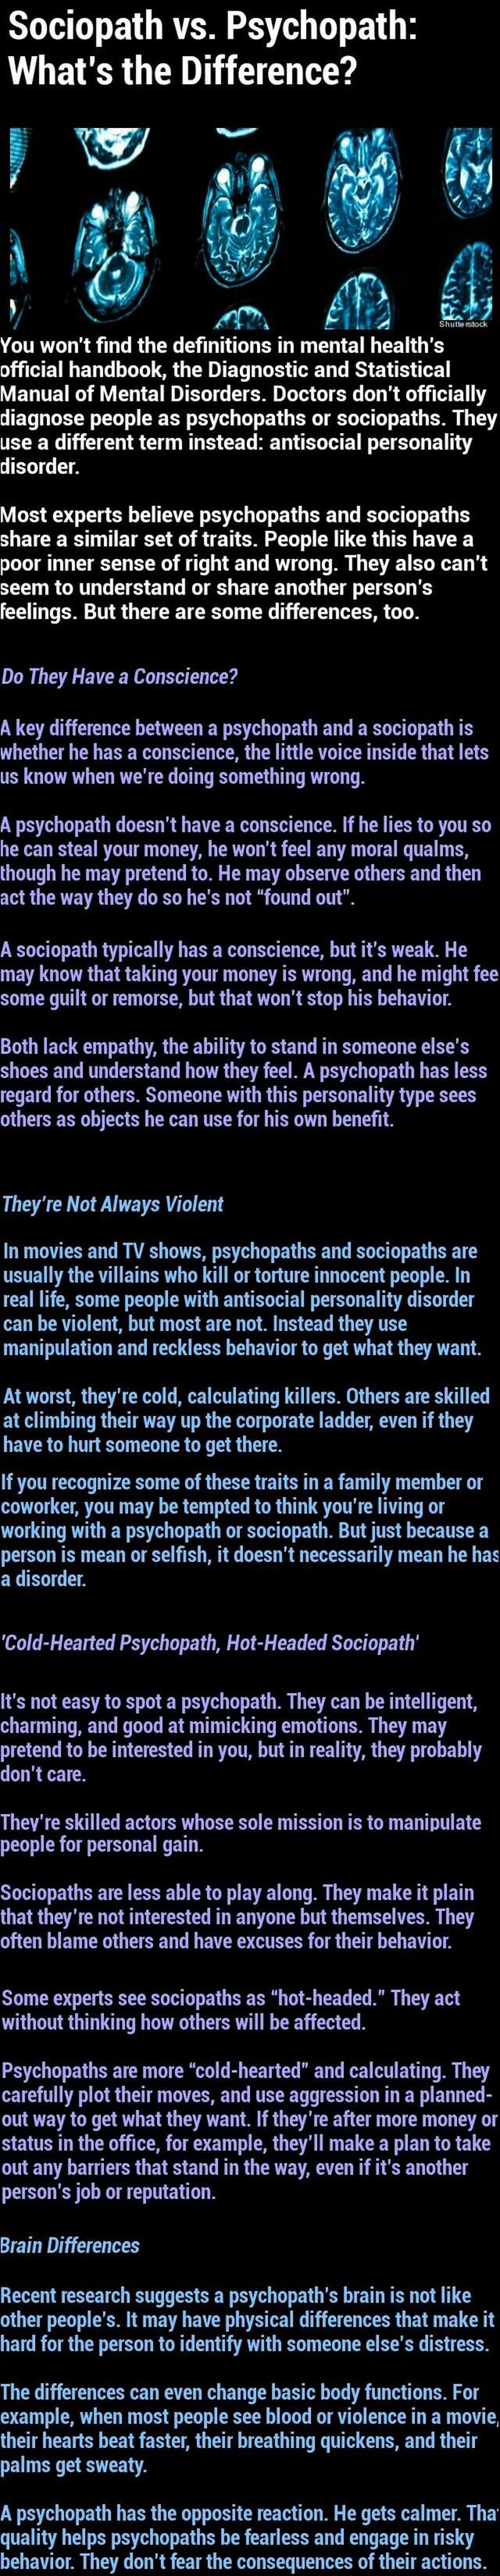 Psychopath difference and of sociopath 